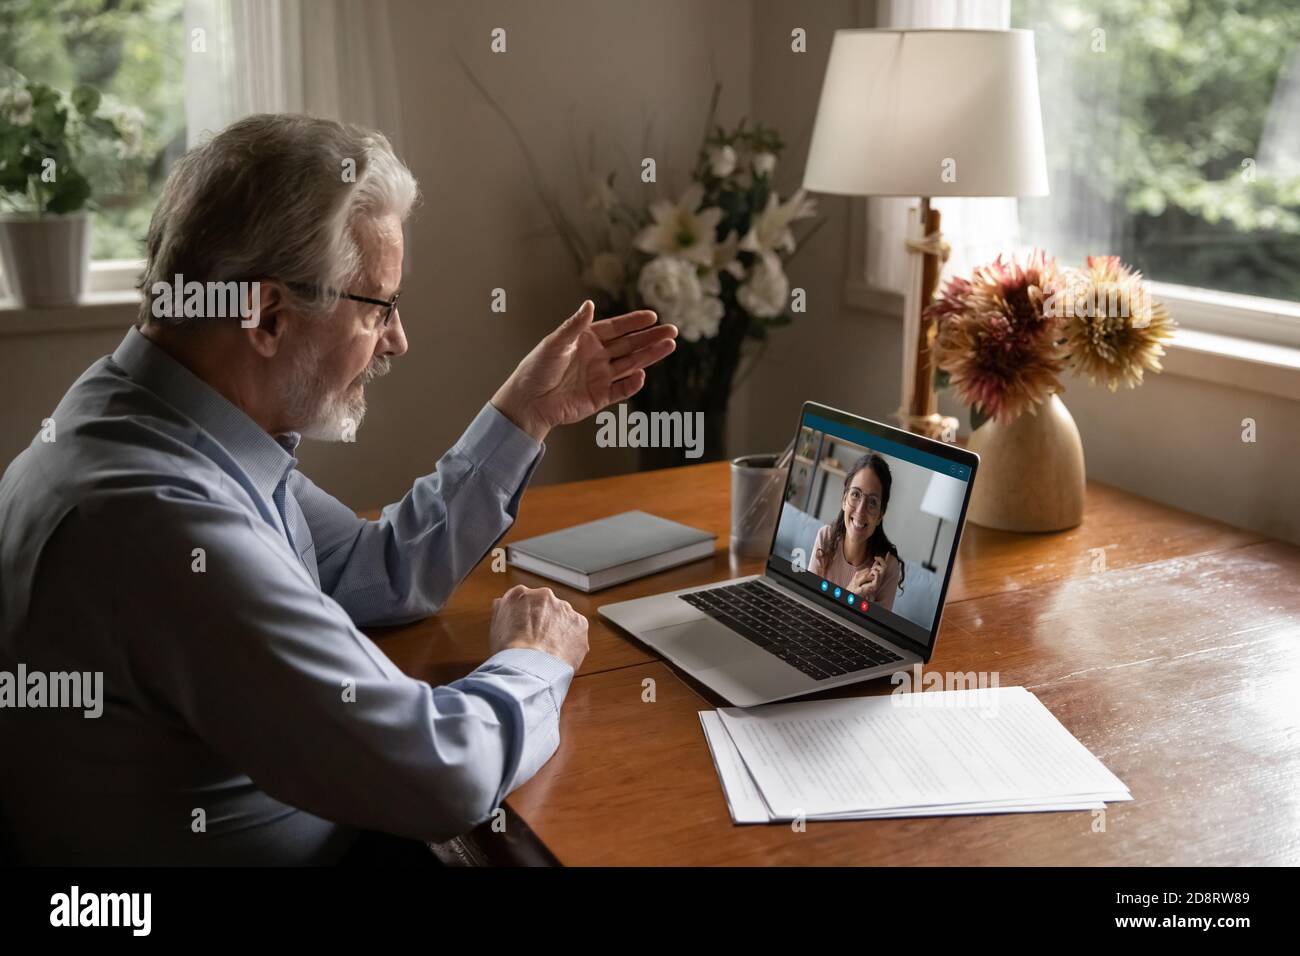 Mature man wearing glasses making video call to adult daughter Stock Photo